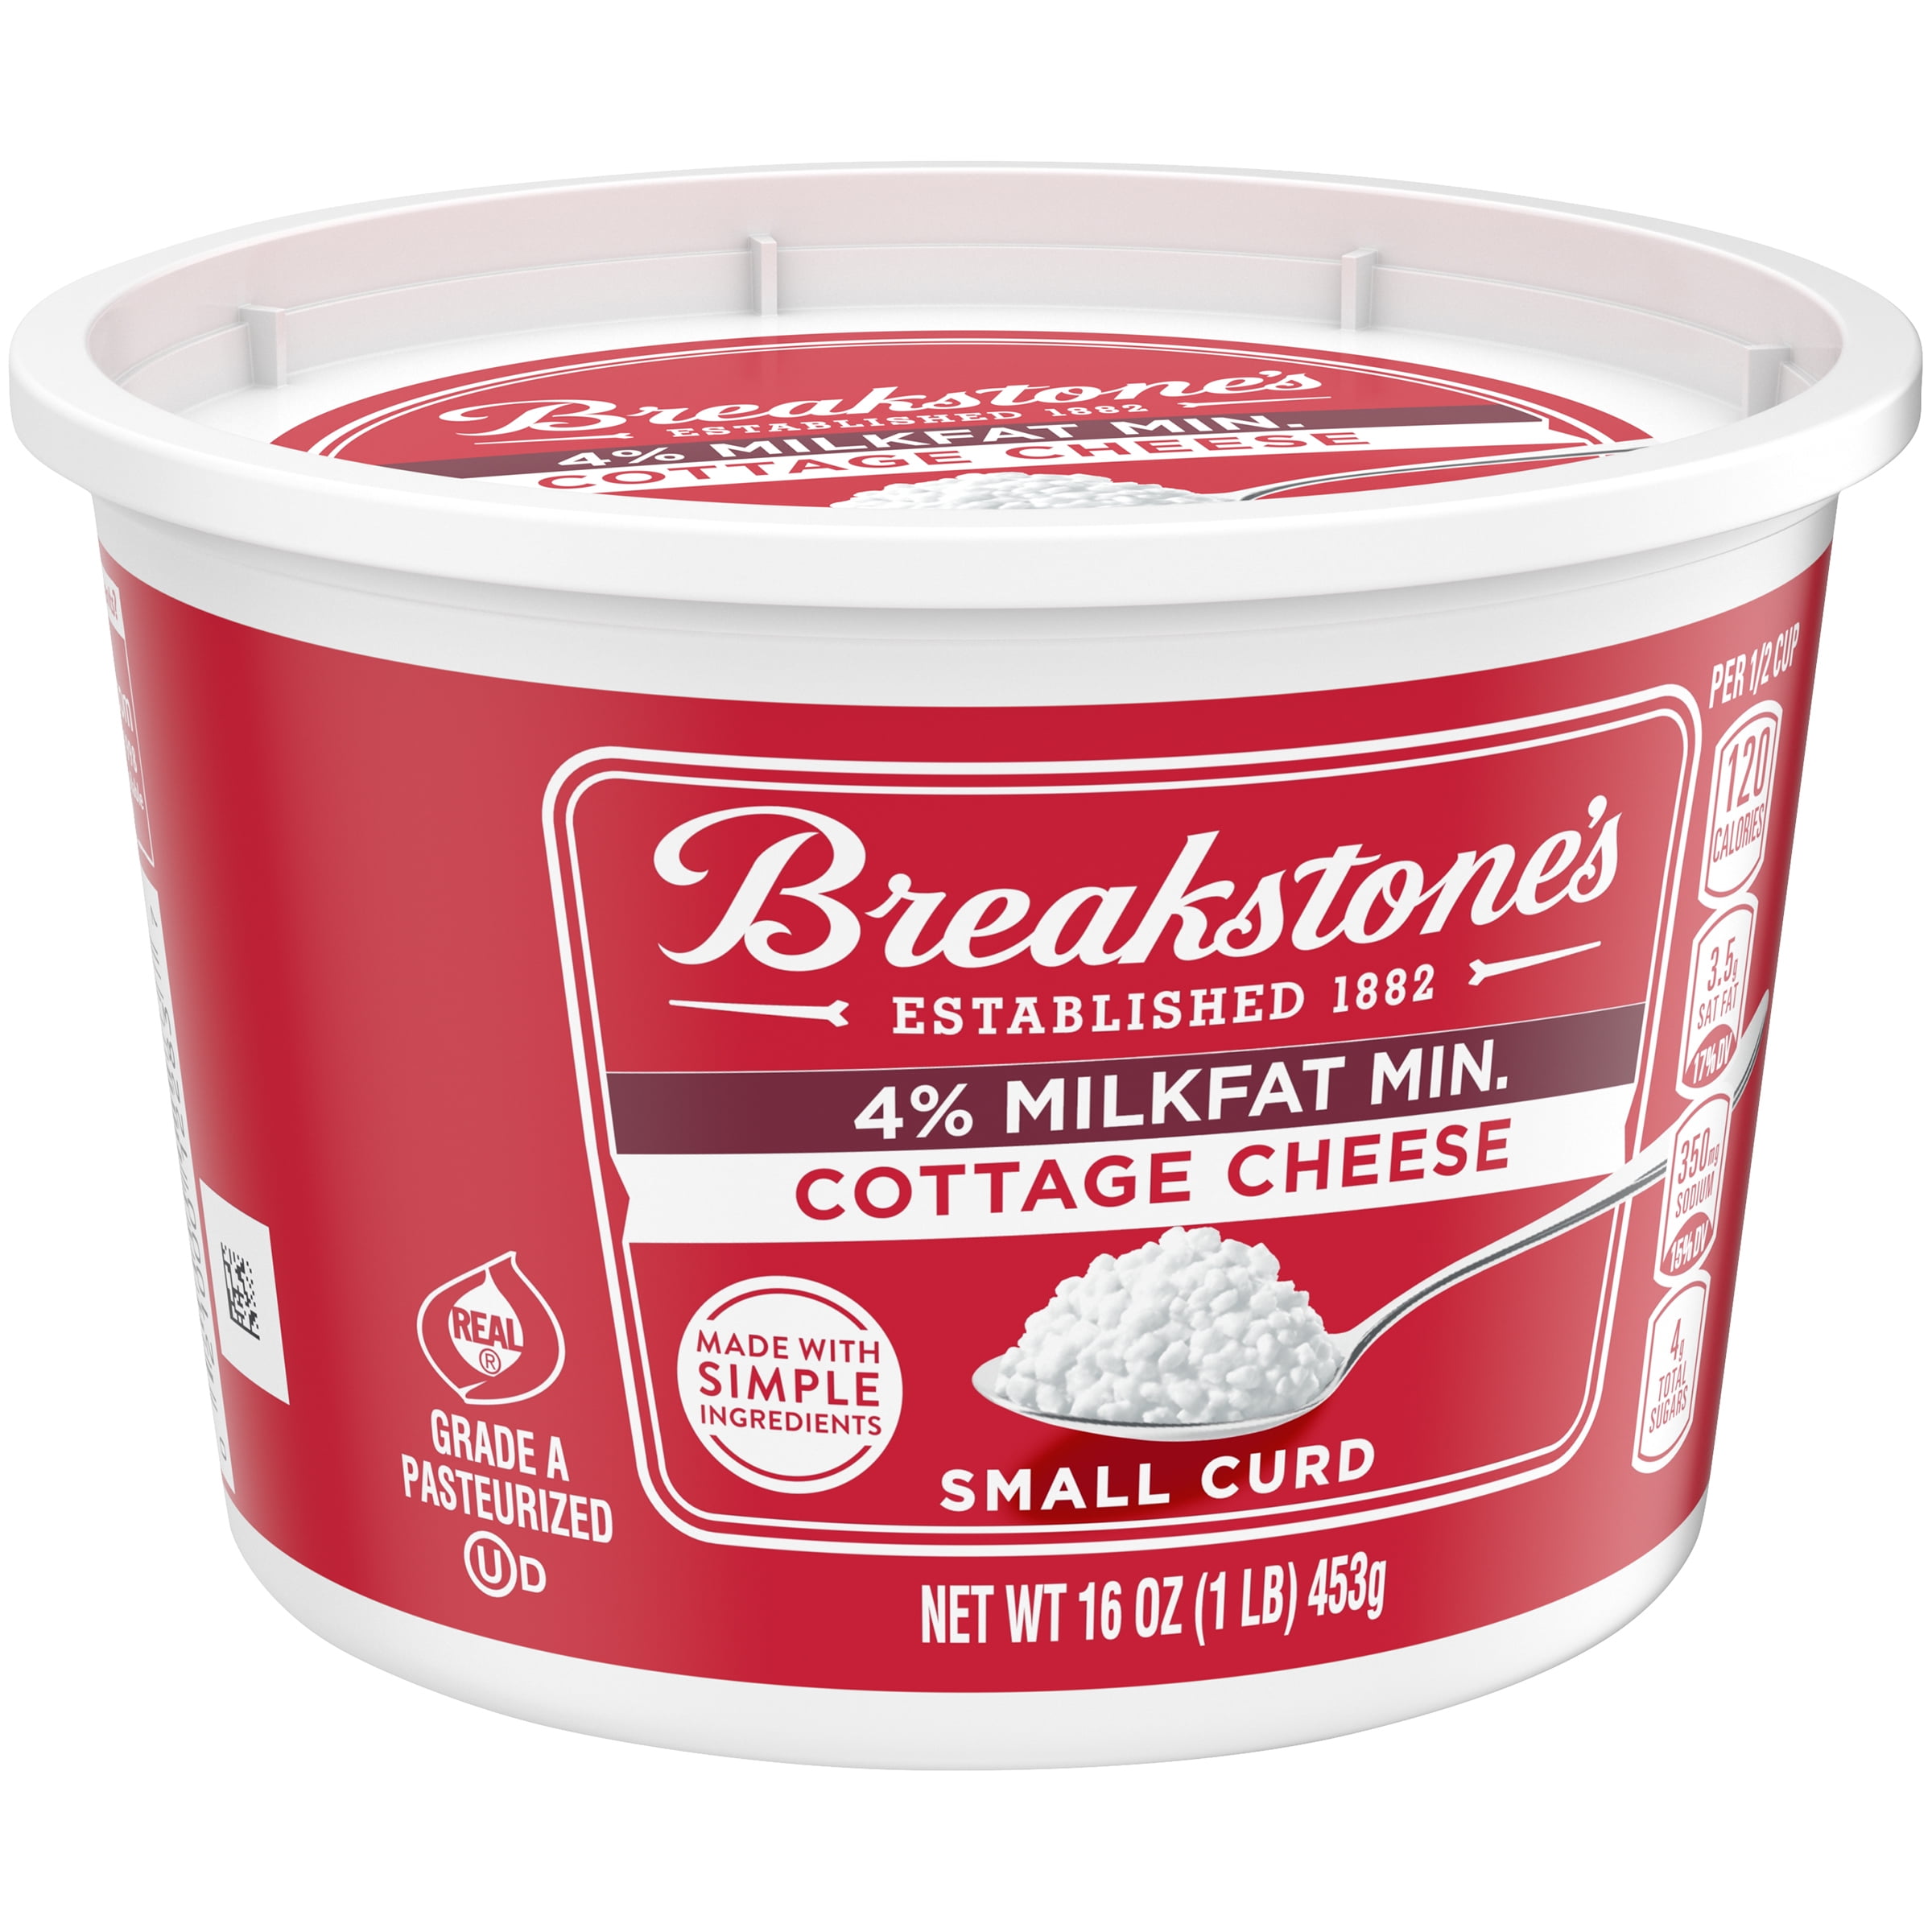 Breakstone S Small Curd 4 Milkfat Cottage Cheese 16 Oz Tub